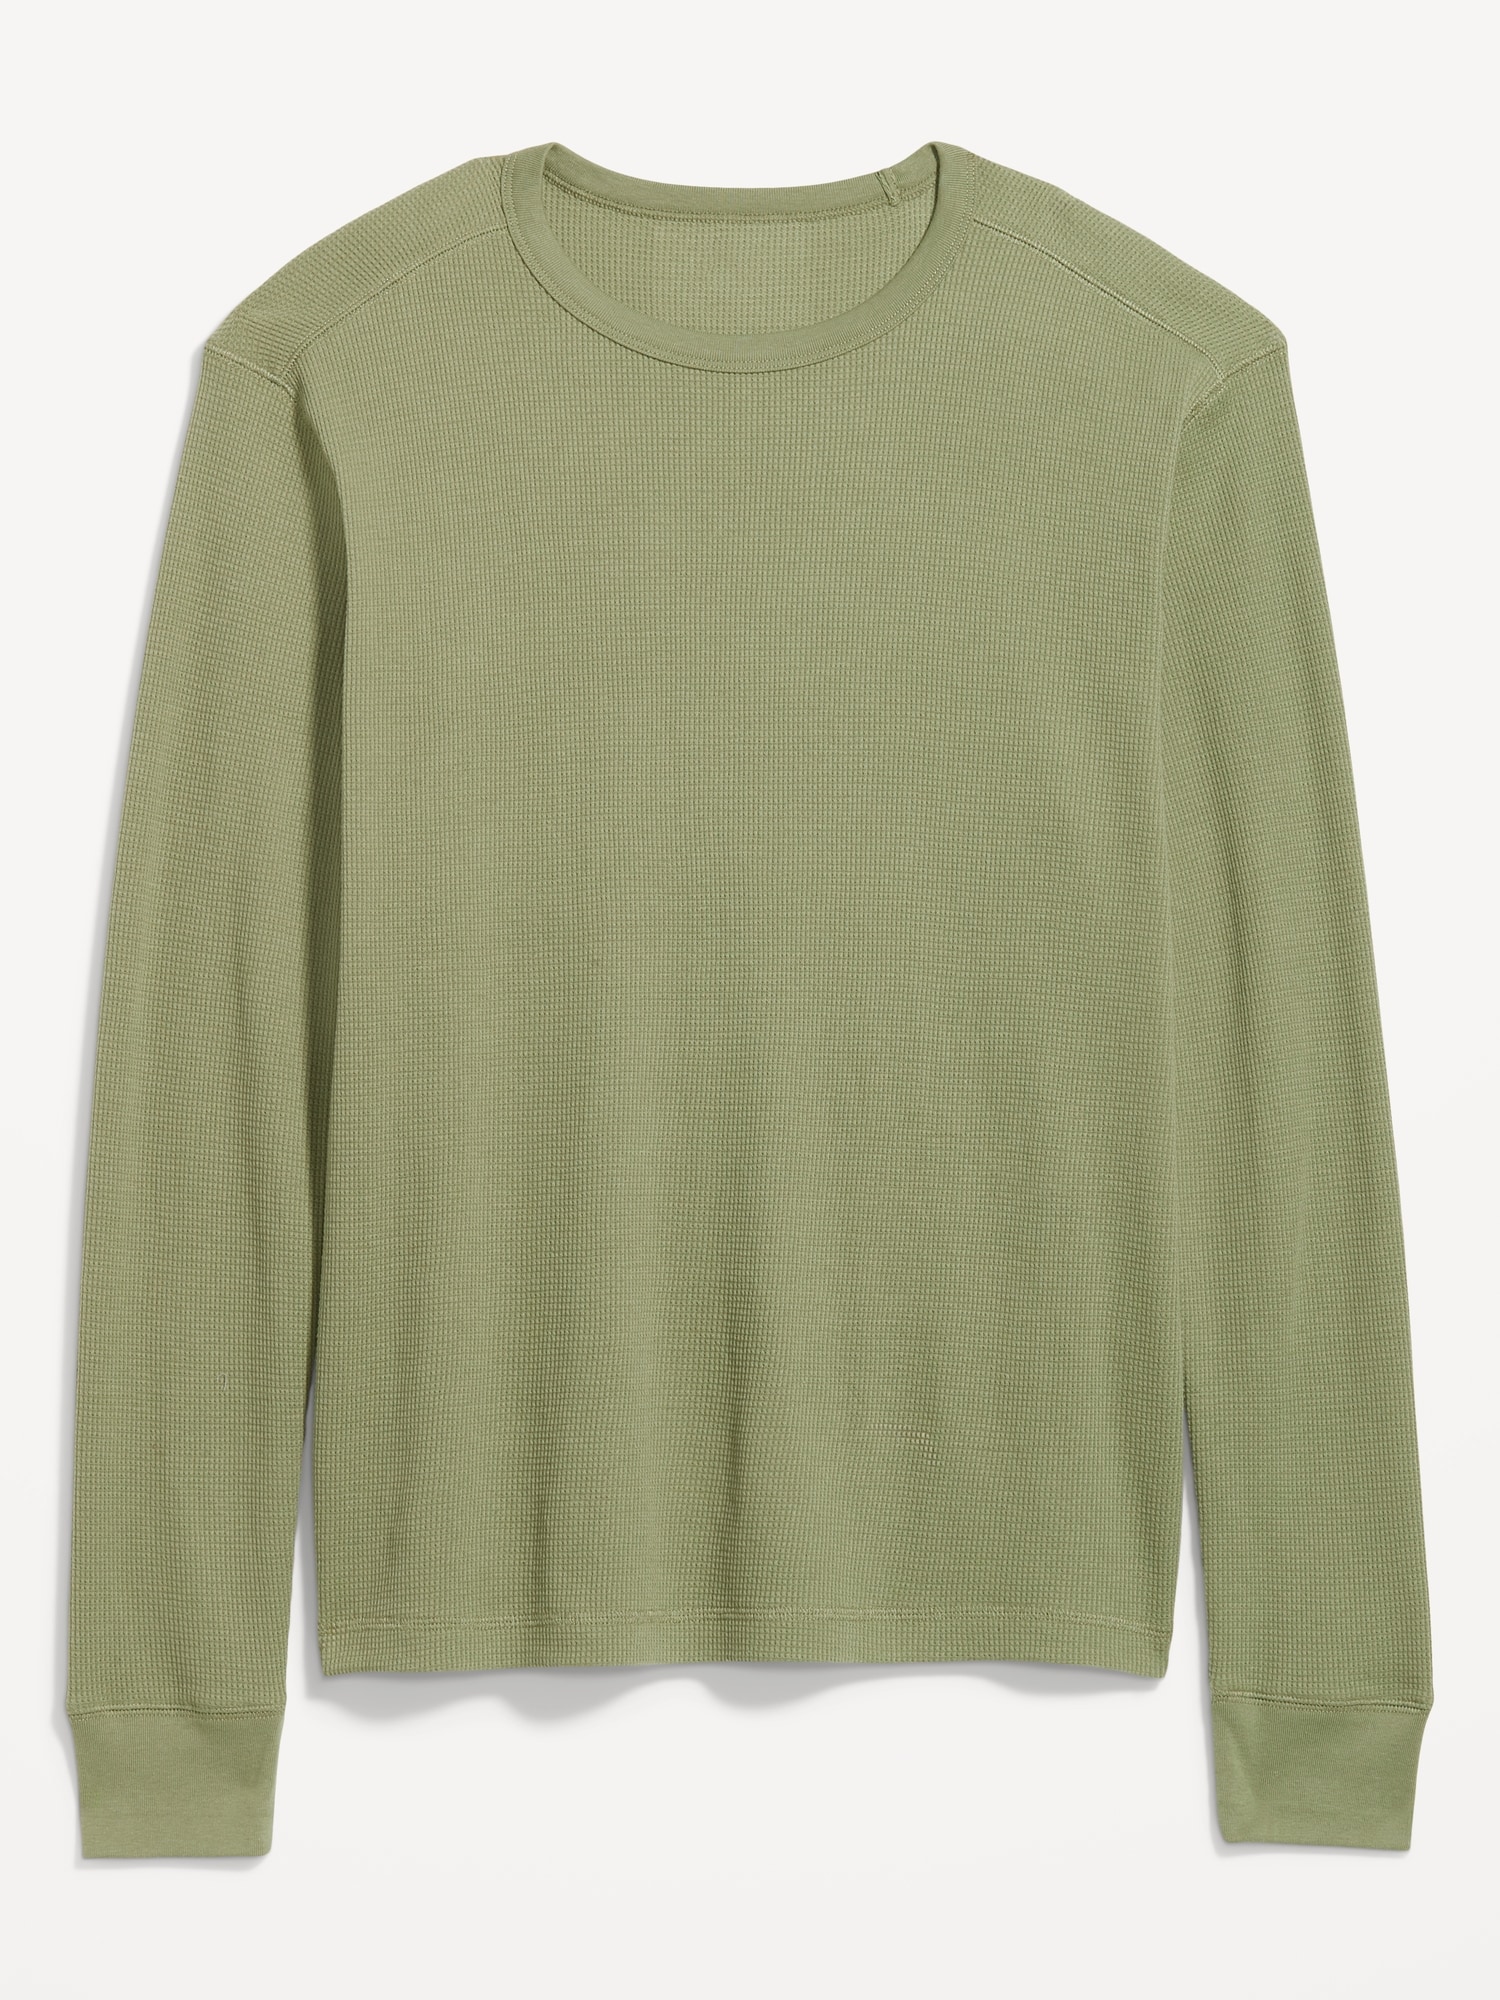 Long-Sleeve Built-In Flex Waffle-Knit T-Shirt | Old Navy